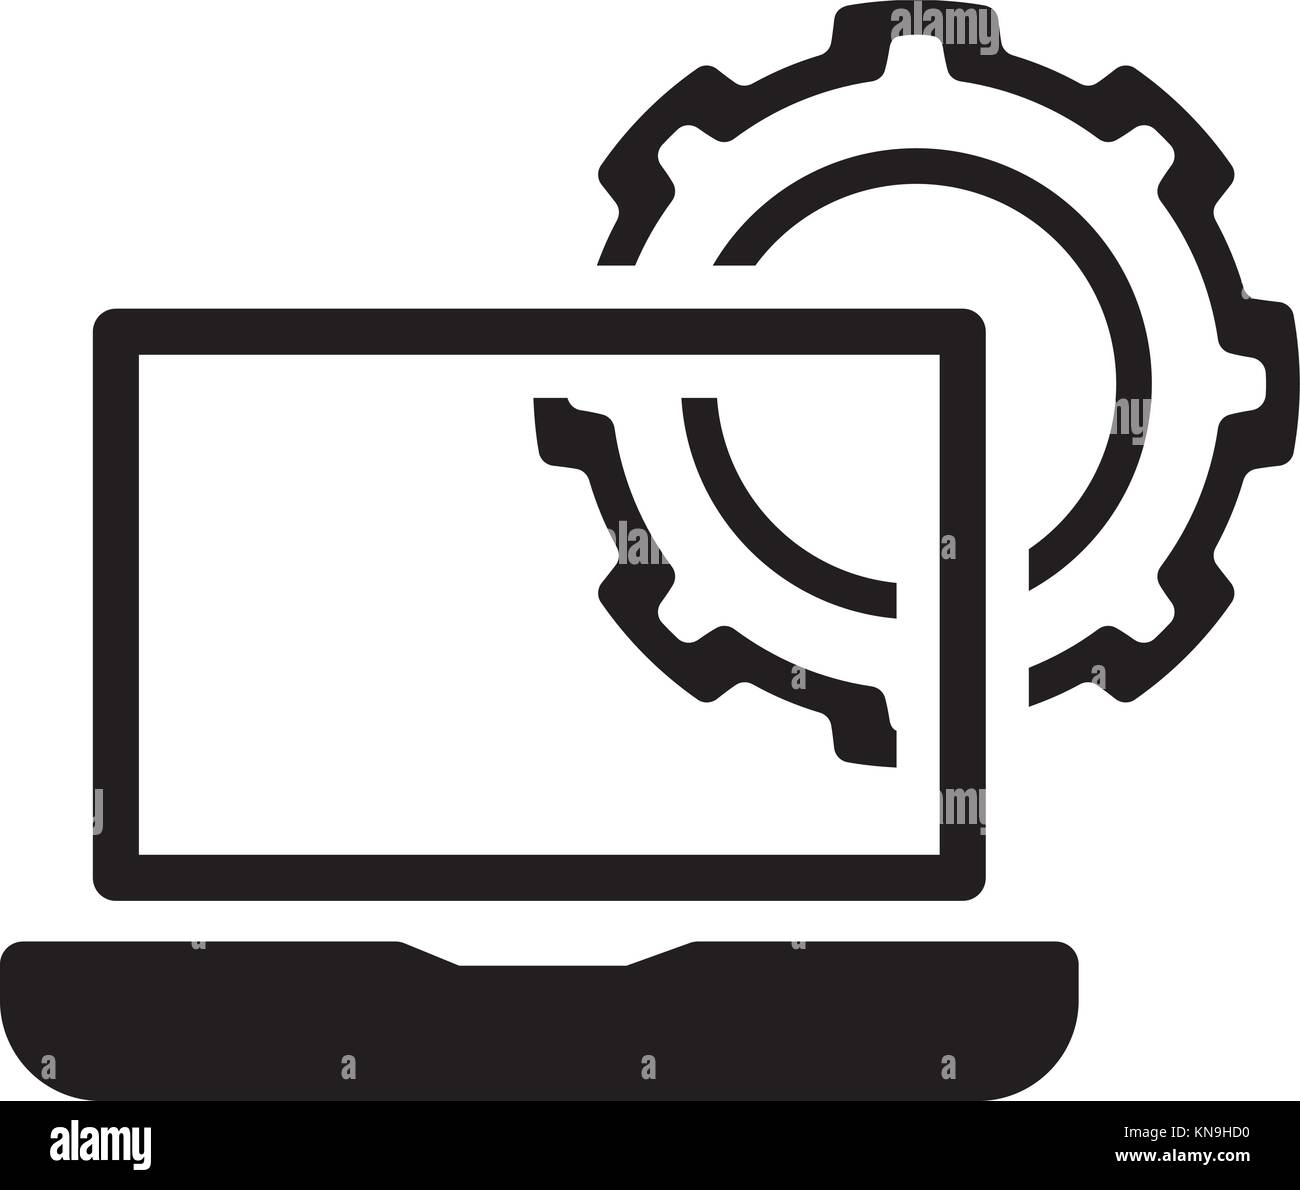 Computer Engineering Icon. Gear and Laptop. Development Symbol. Stock Vector